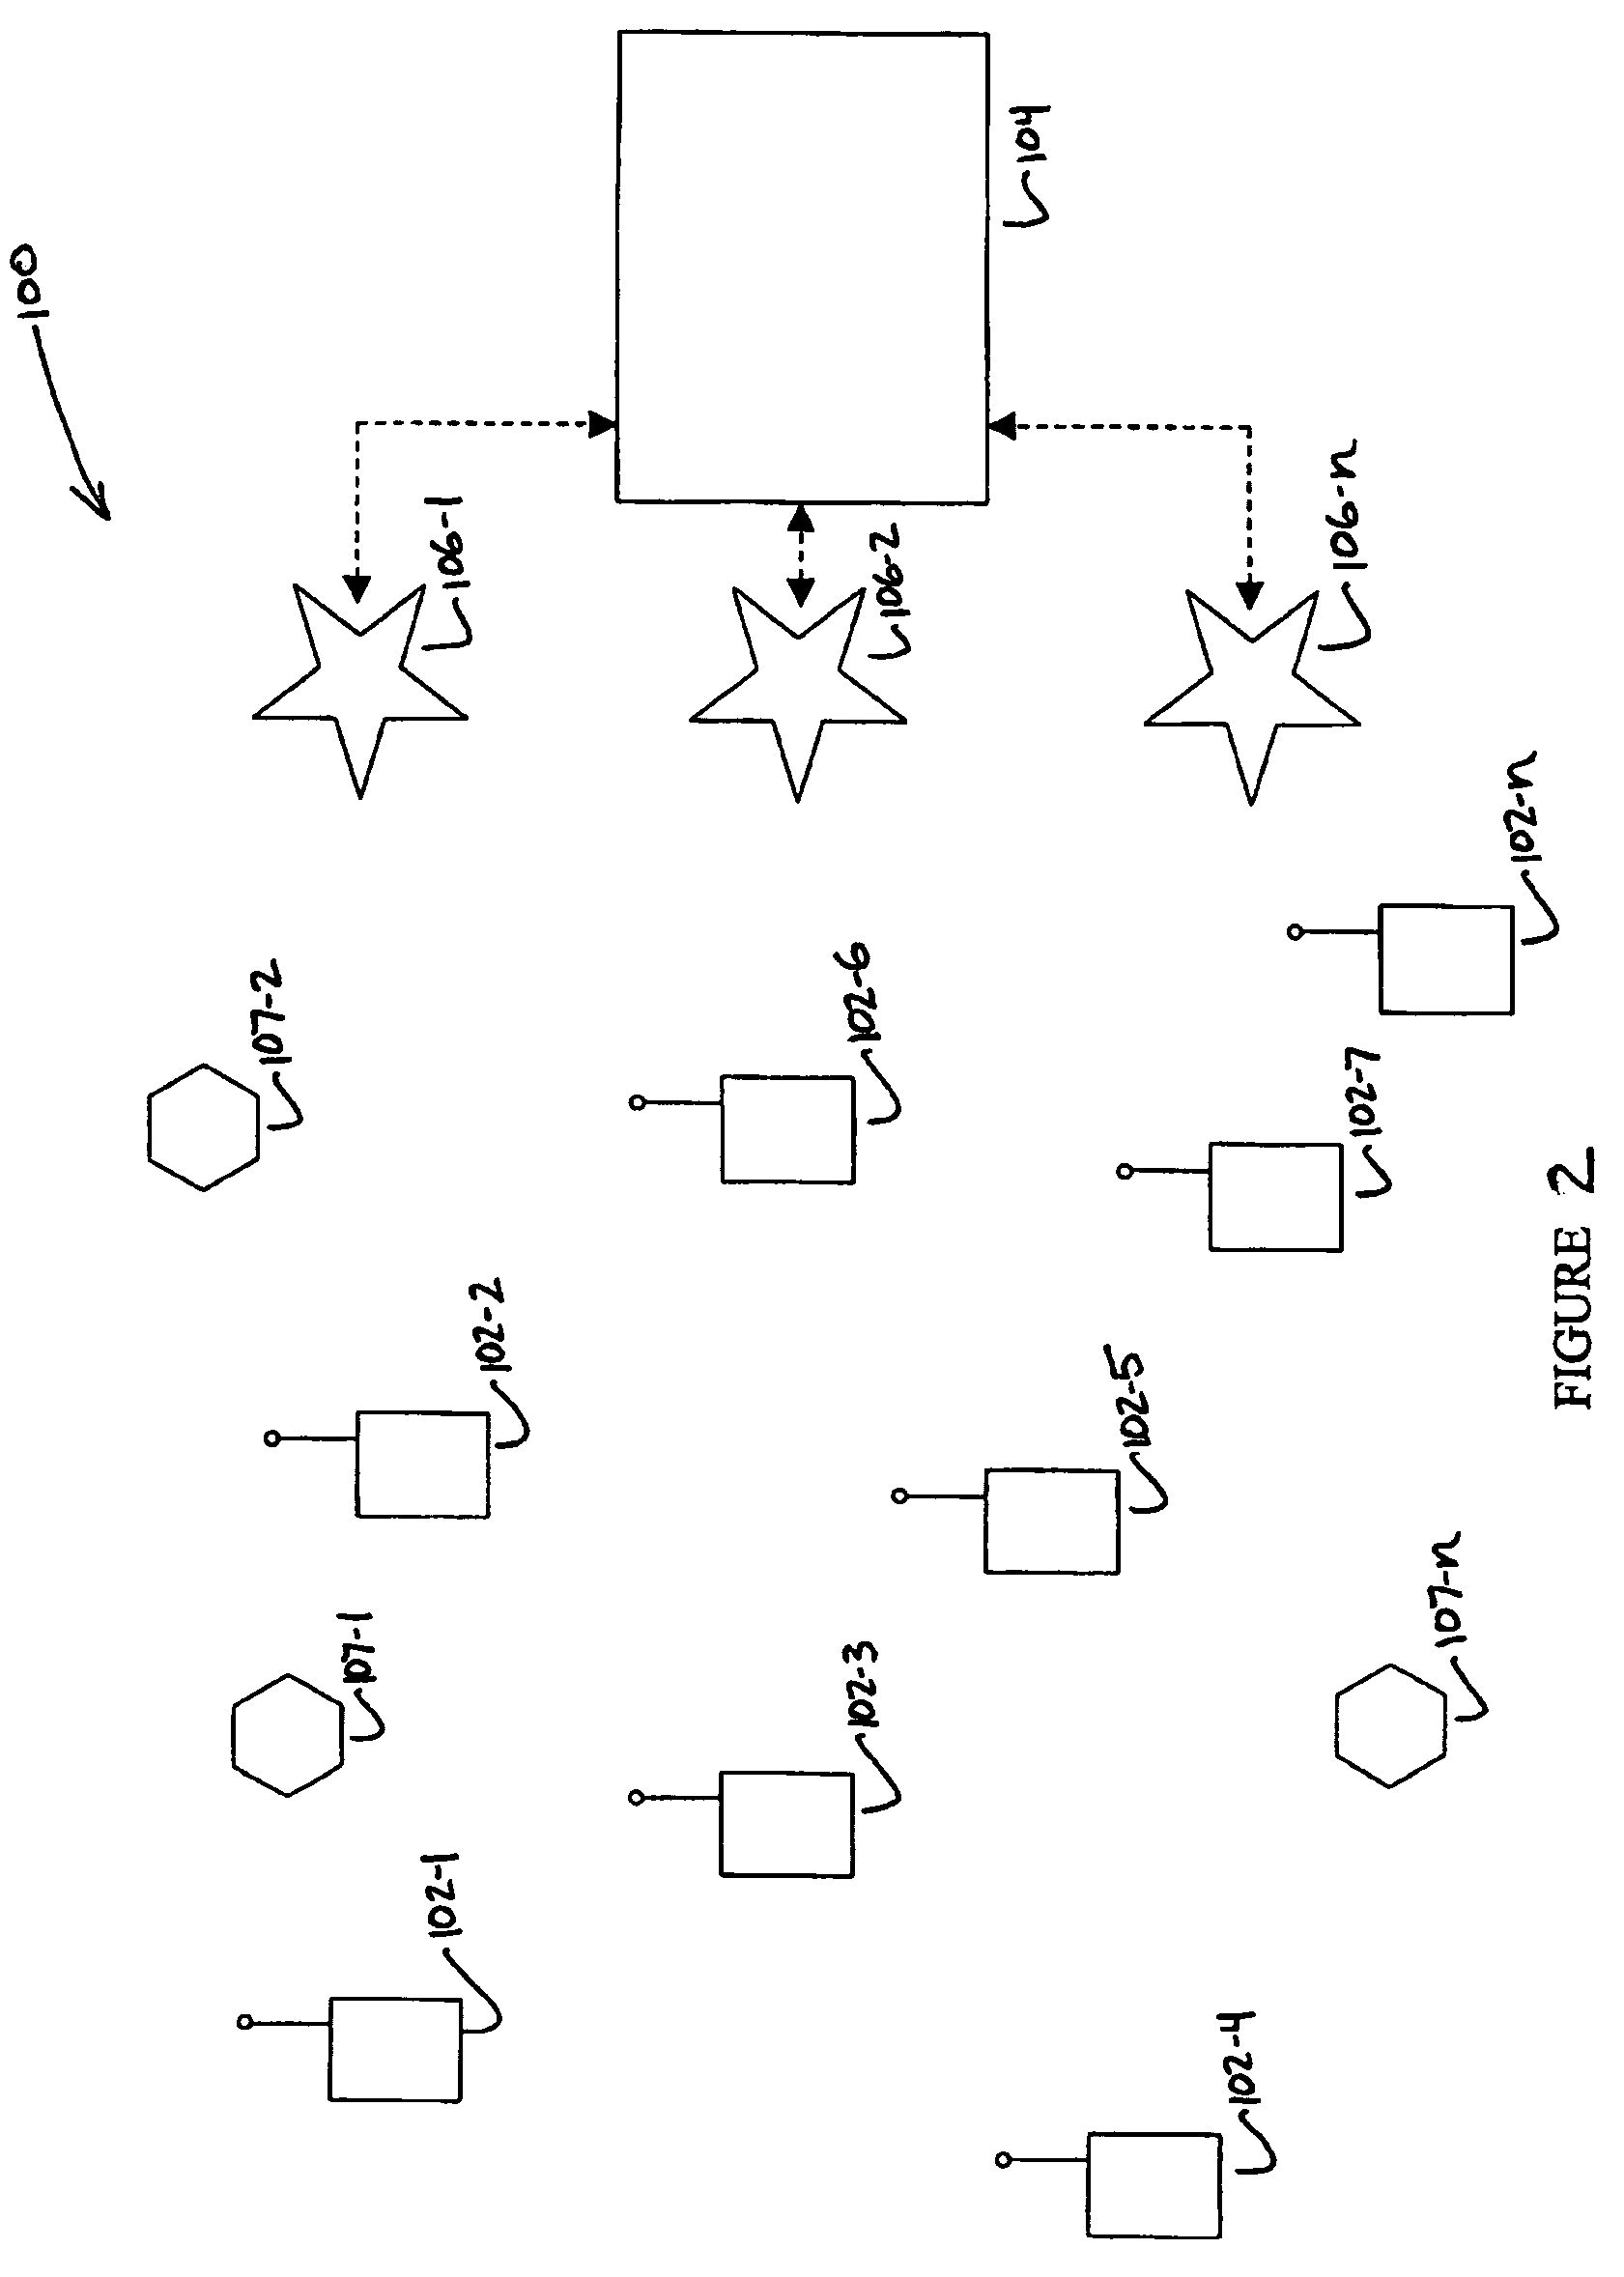 System and method to decrease the route convergence time and find optimal routes in a wireless communication network